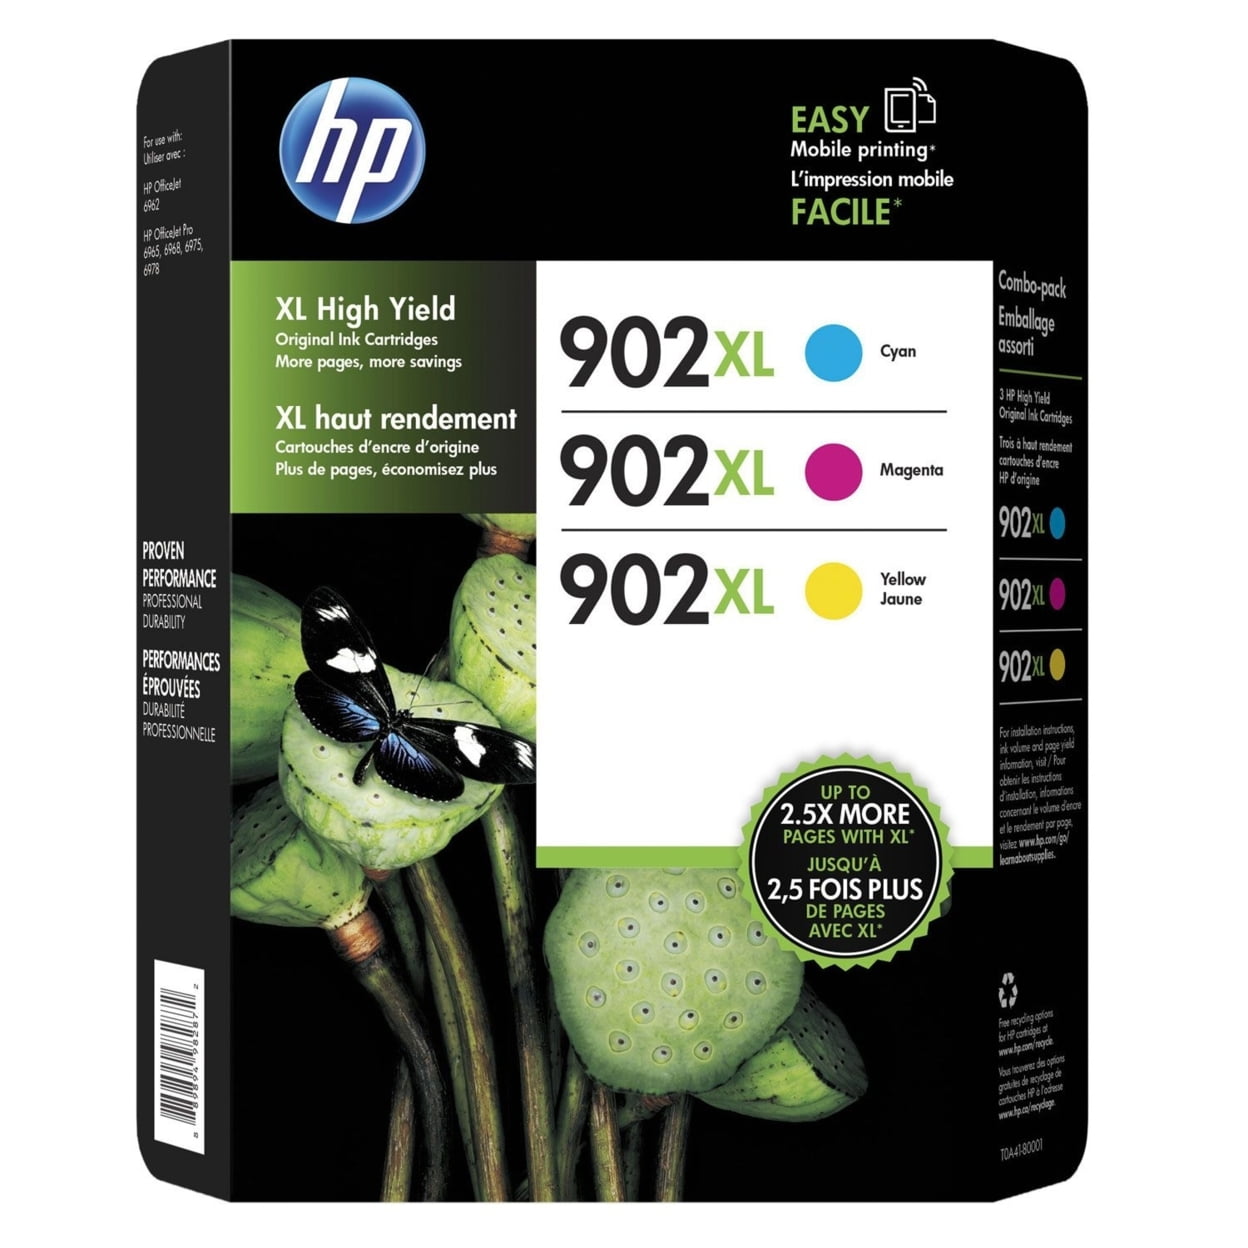 XL ink cartridge from HP (more than double the price) next to the normal  cartridge. : r/assholedesign